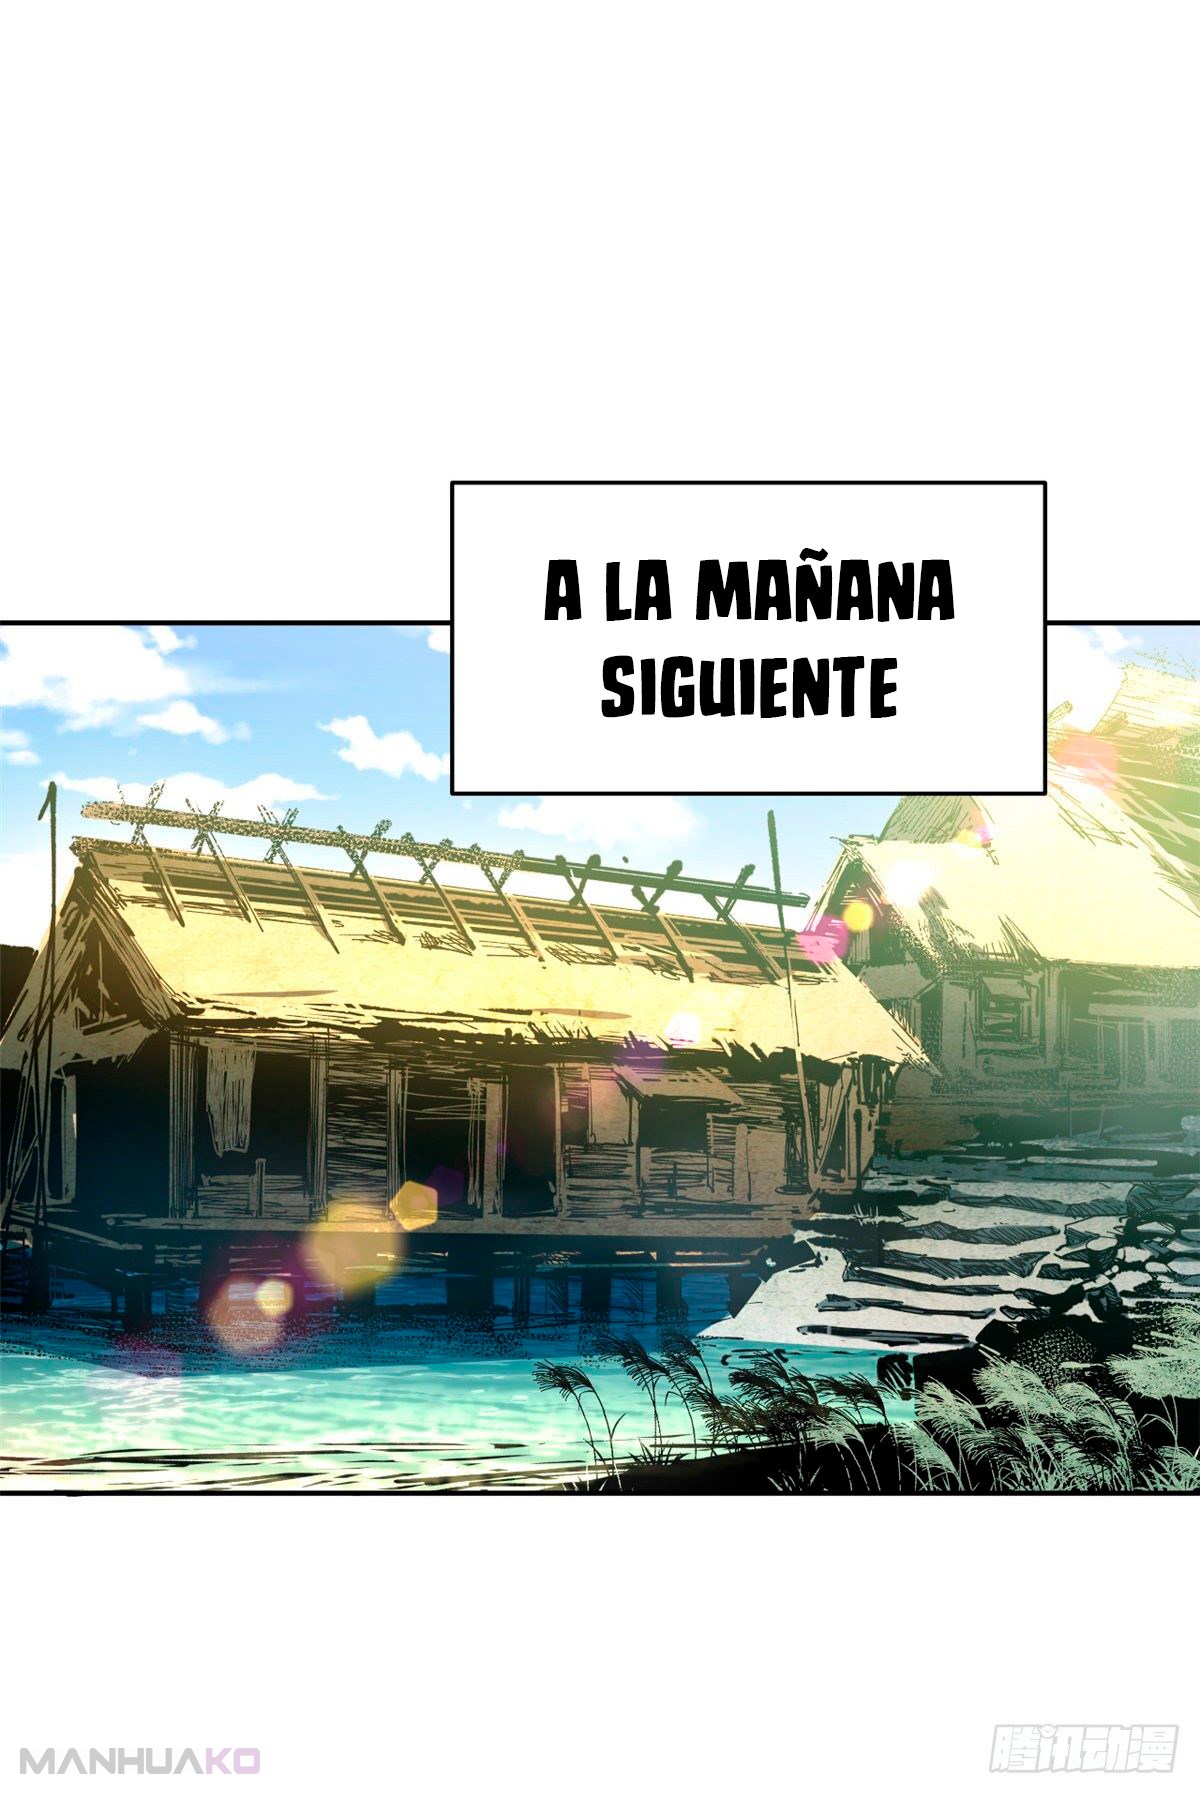 Top Tier Providence, Secretly Cultivate for a Thousand Years Capítulo 1  Español - MangaTV